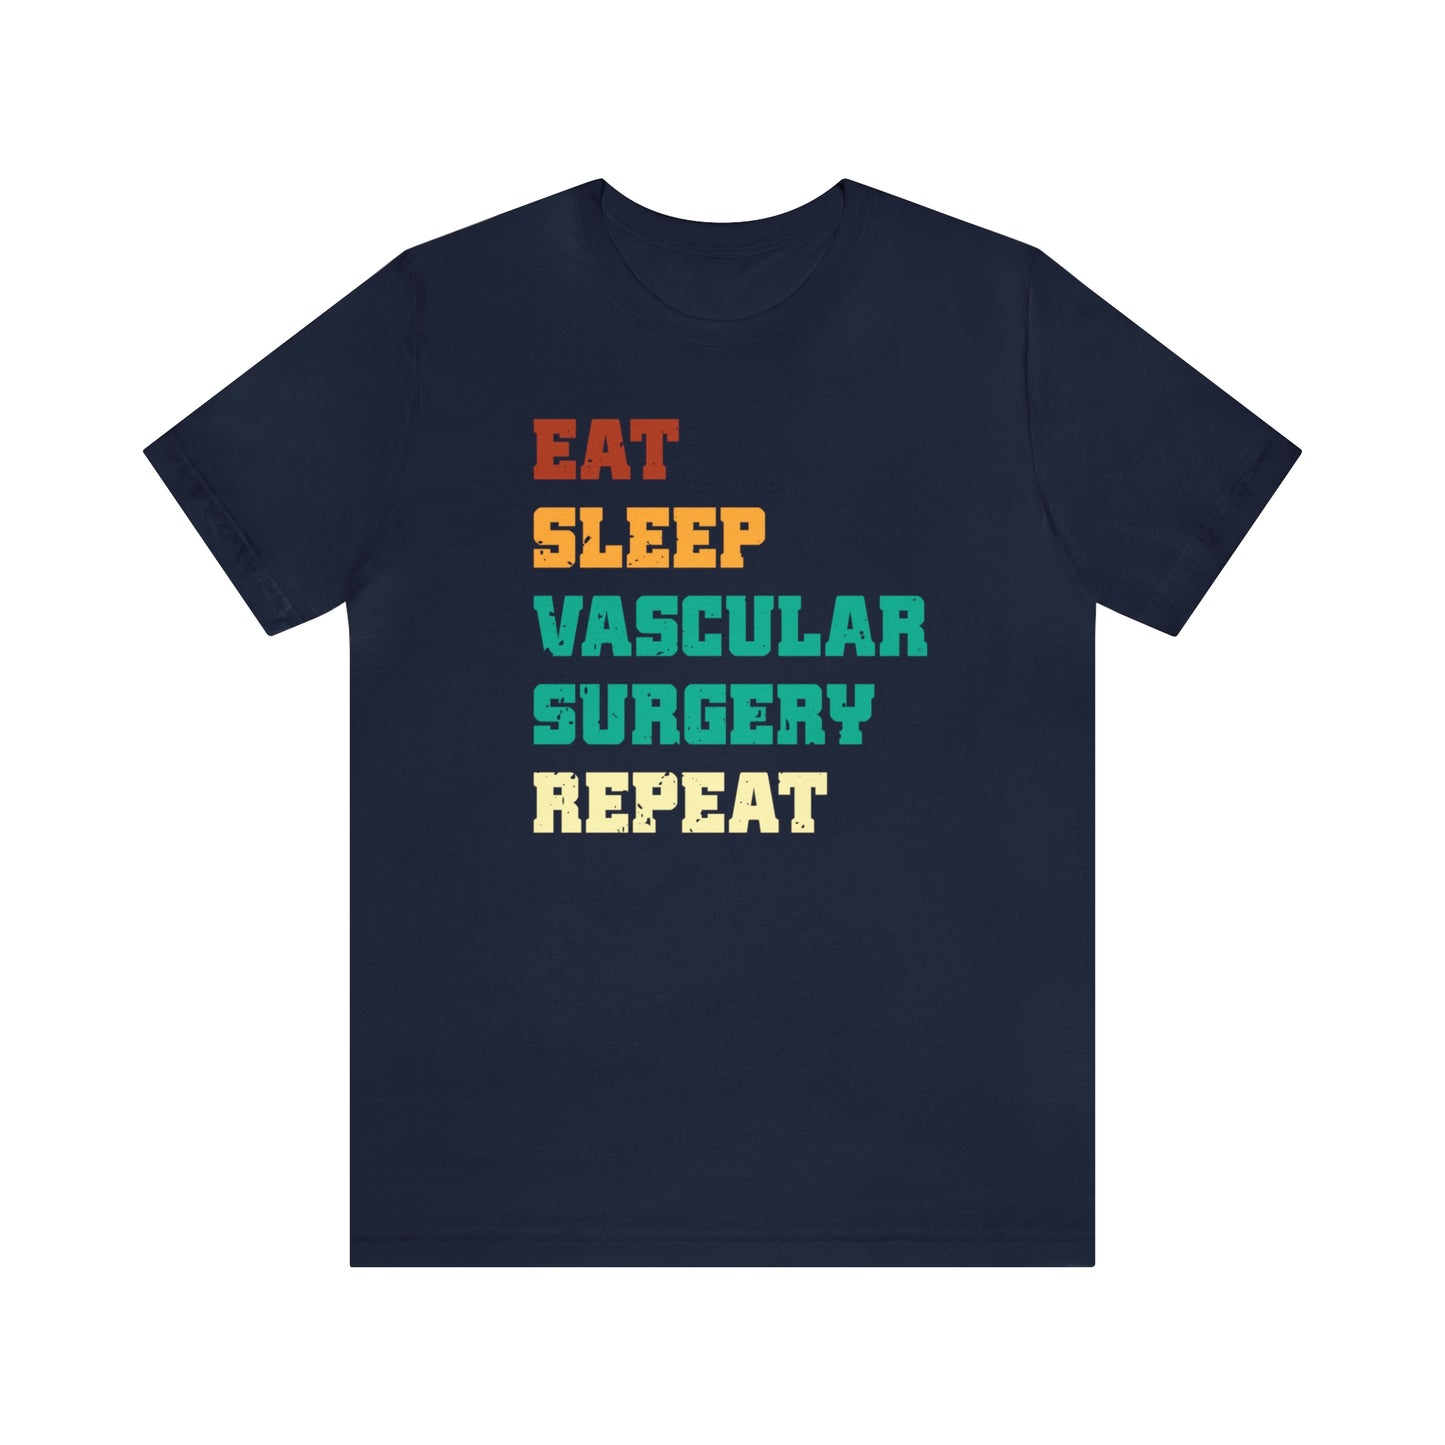 Eat Sleep Vascular Surgery Repeat, Unisex T-shirt, Mothers Day, Fathers Day, Doctor, Surgeon, Surgical Team Gift